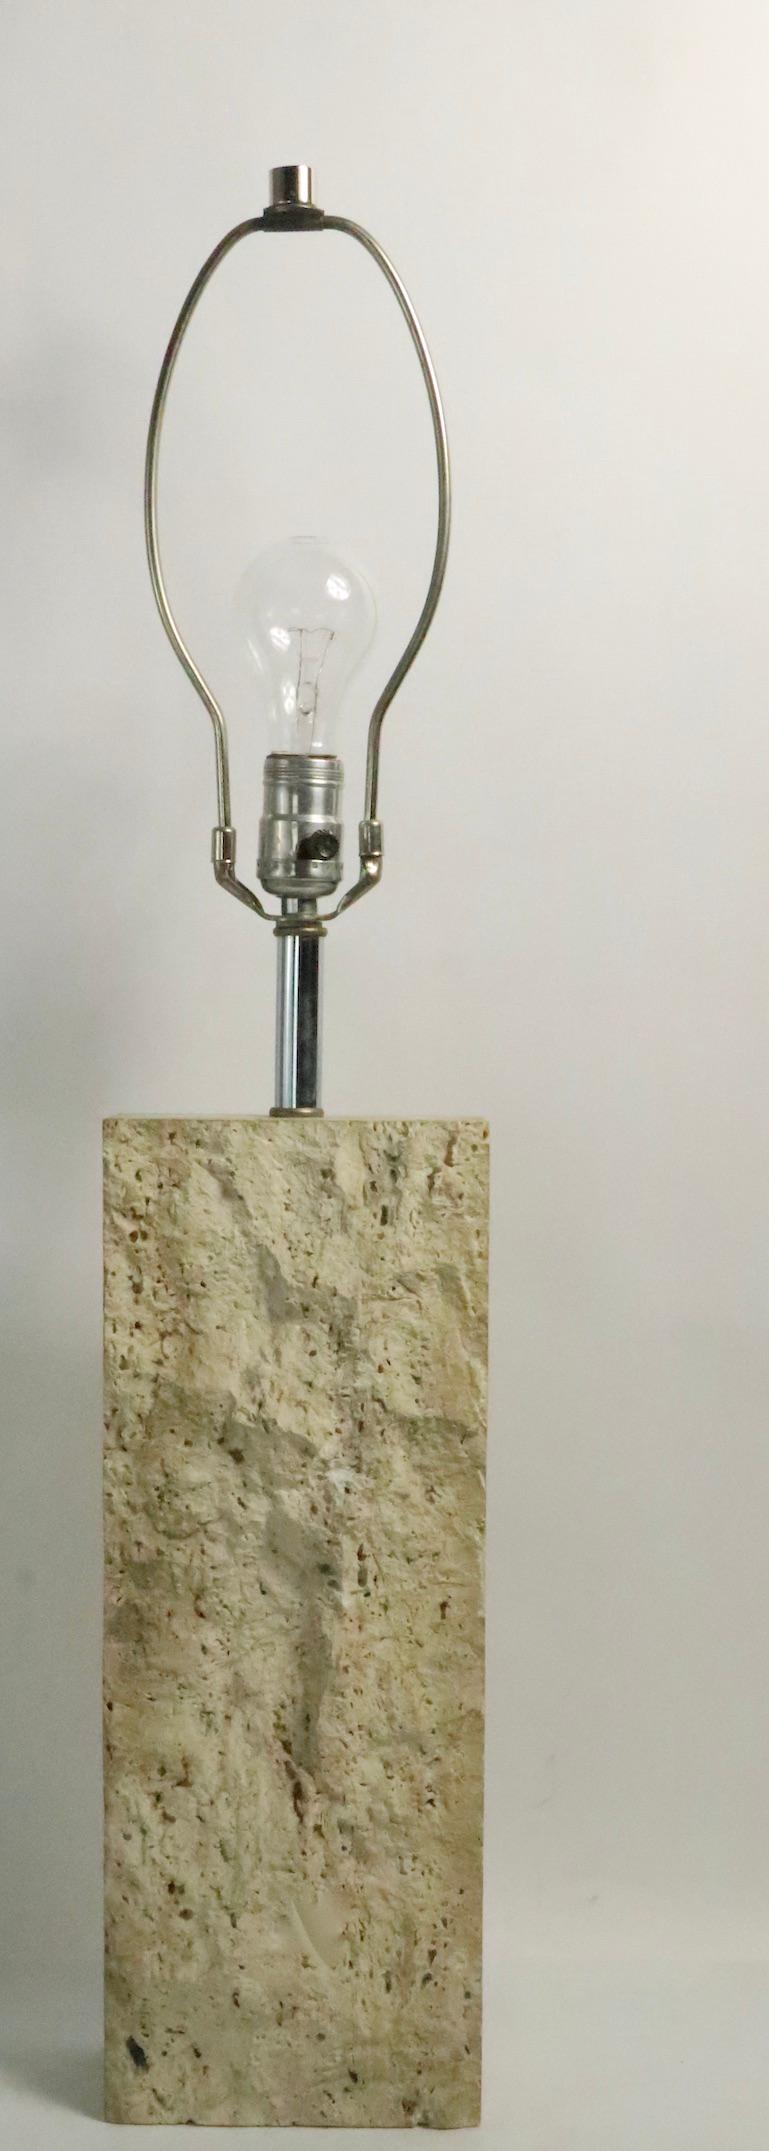 Chic and sophisticated travertine table lamp having an unusual dimensional rough front surface.
Made in Italy, circa 1970s, original, working, clean and ready to use.
Lamp accepts a standard size screw in bulb, shade not included.
Height to top